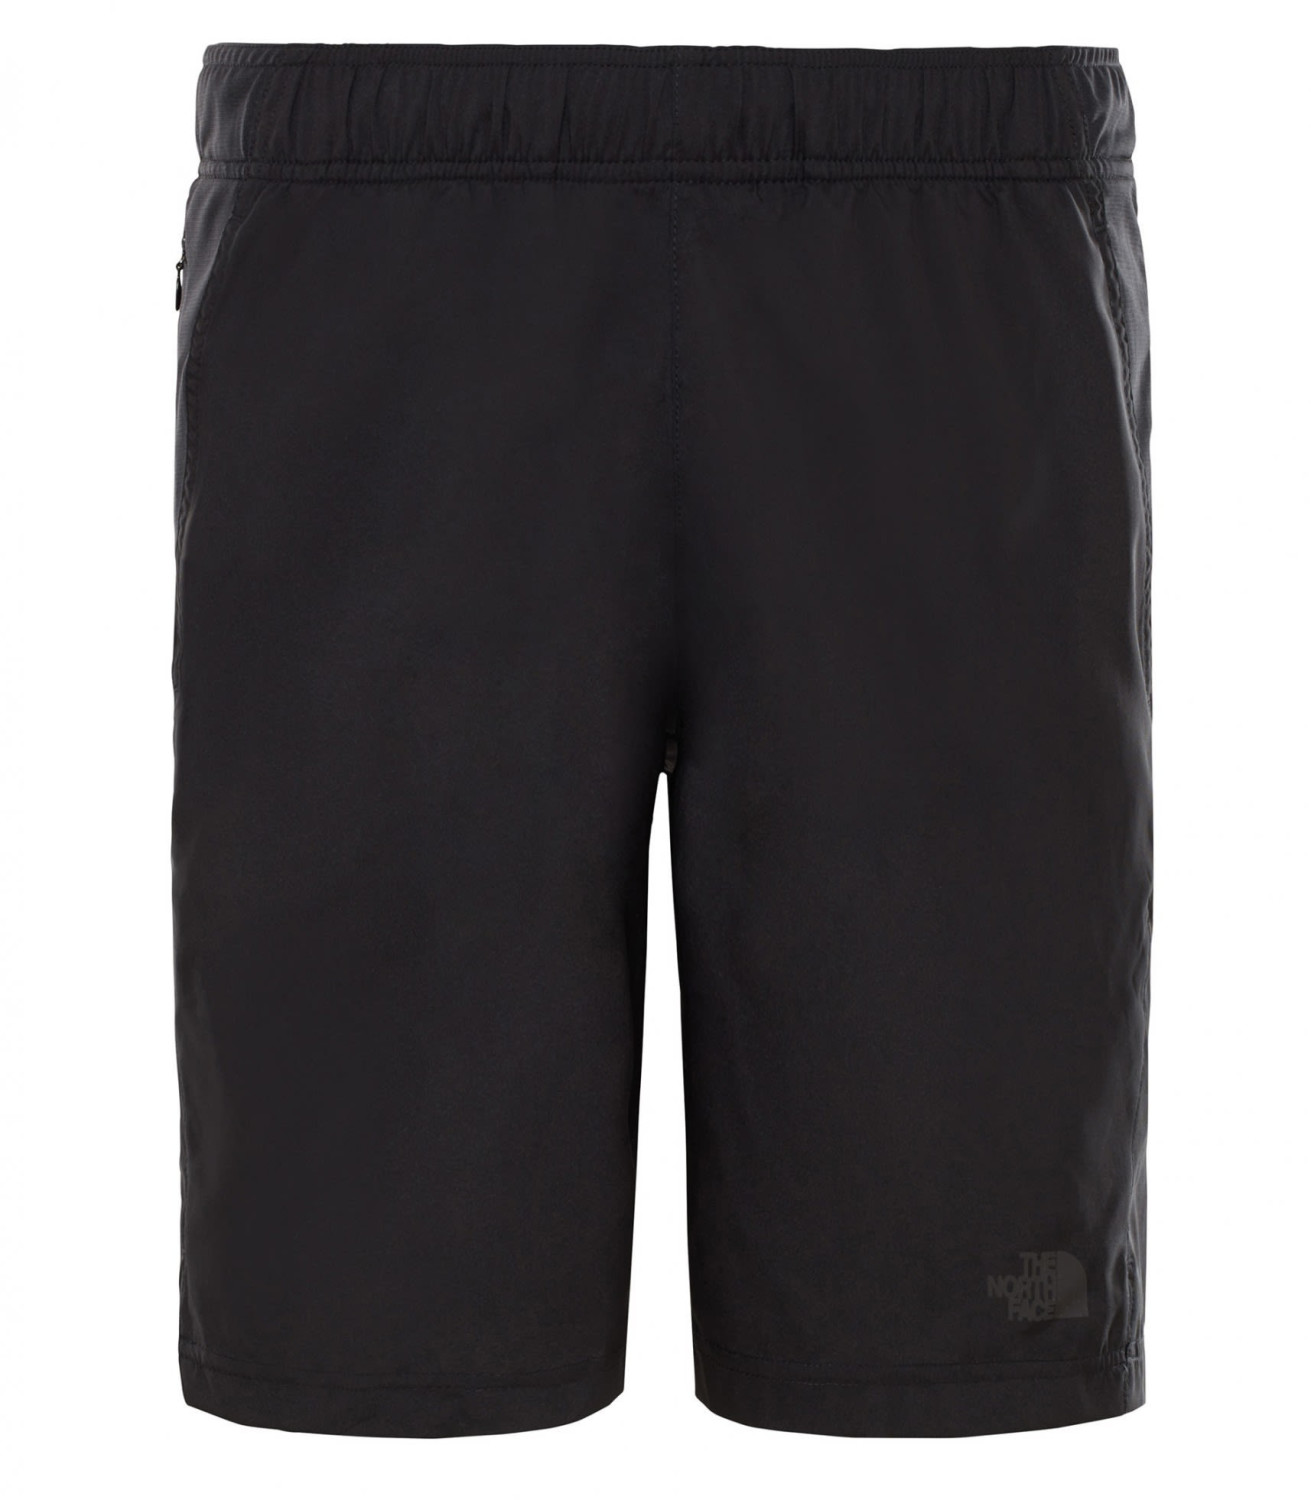 Buy The North Face 24/7 Shorts Black from £35.00 (Today) – Best Deals on